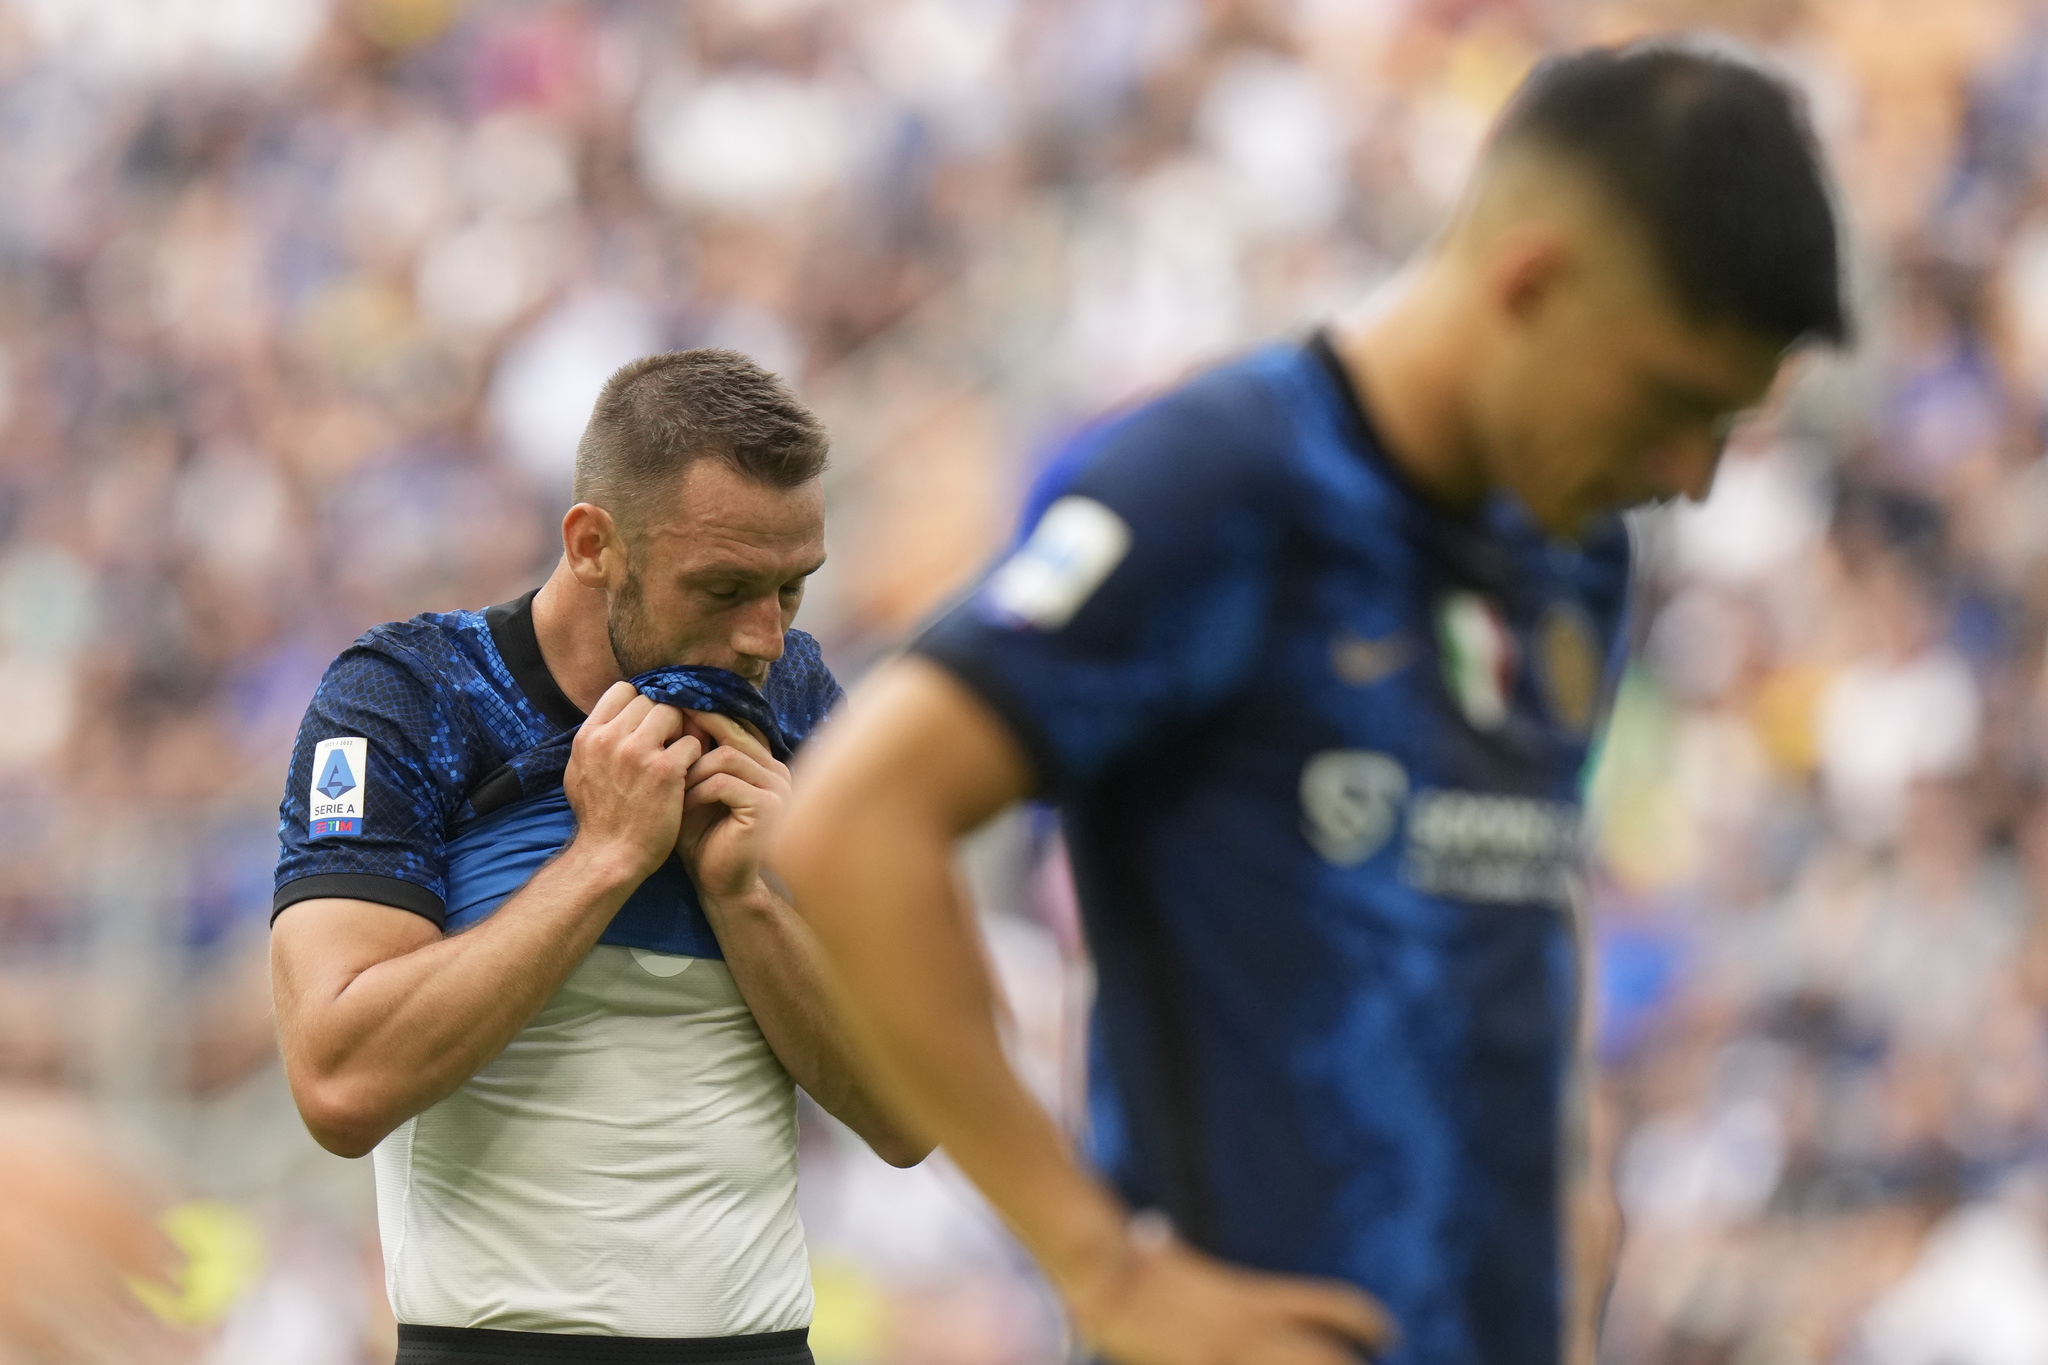  lt;HIT gt;Inter lt;/HIT gt; Milan's Stefan de Vrij, left, gestures during a Serie A soccer match between  lt;HIT gt;Inter lt;/HIT gt; Milan and Sampdoria at the San Siro stadium in Milan, Italy, Sunday, May 22, 2022. (AP Photo/Luca Bruno)